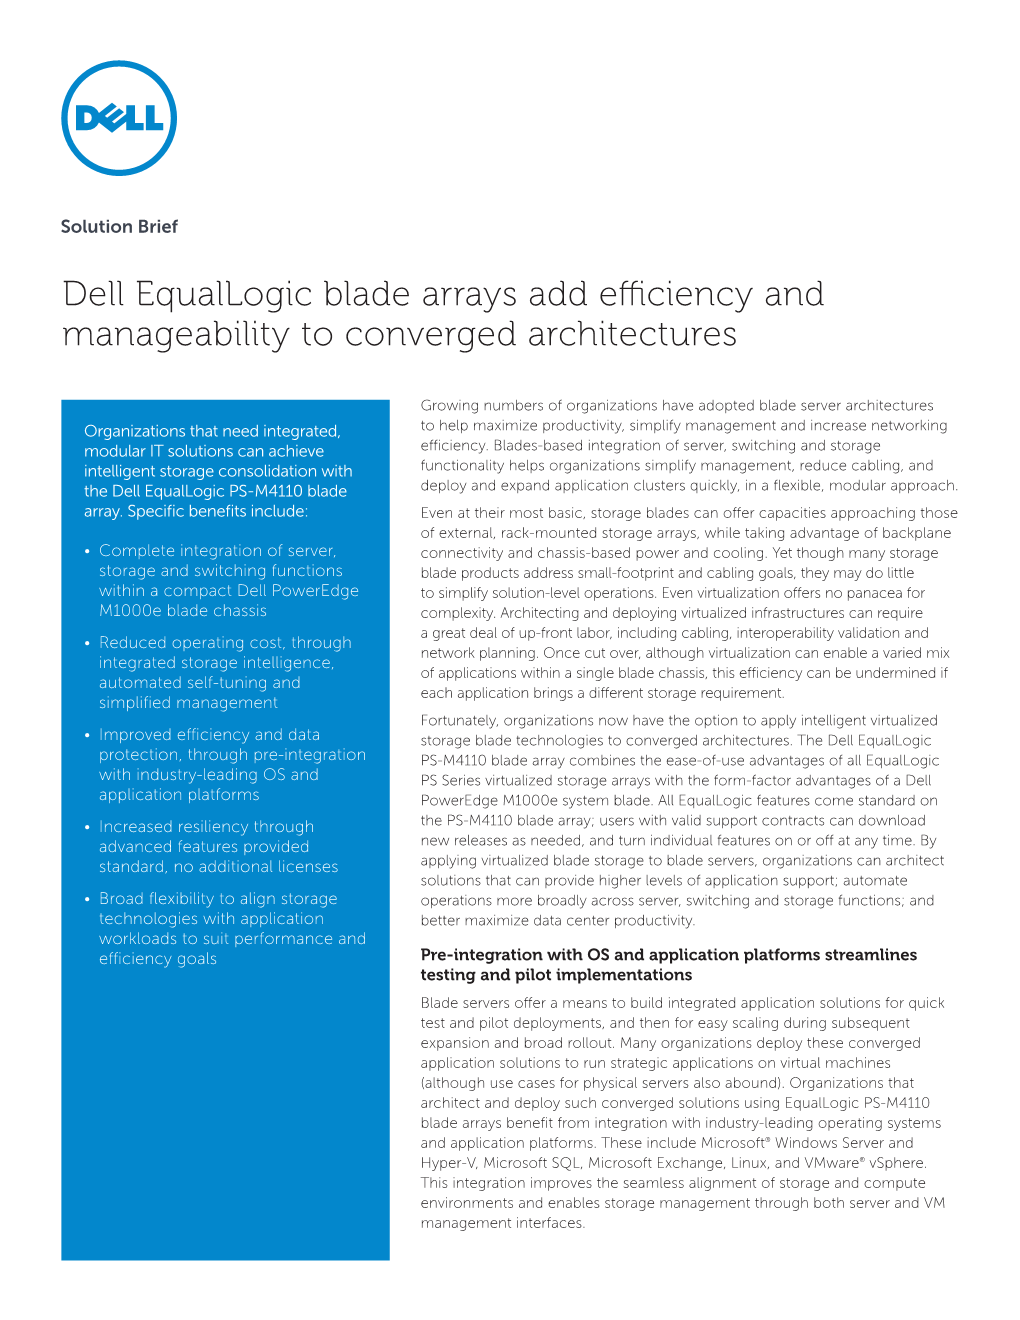 Dell Equallogic Blade Arrays Add Efficiency and Manageability to Converged Architectures